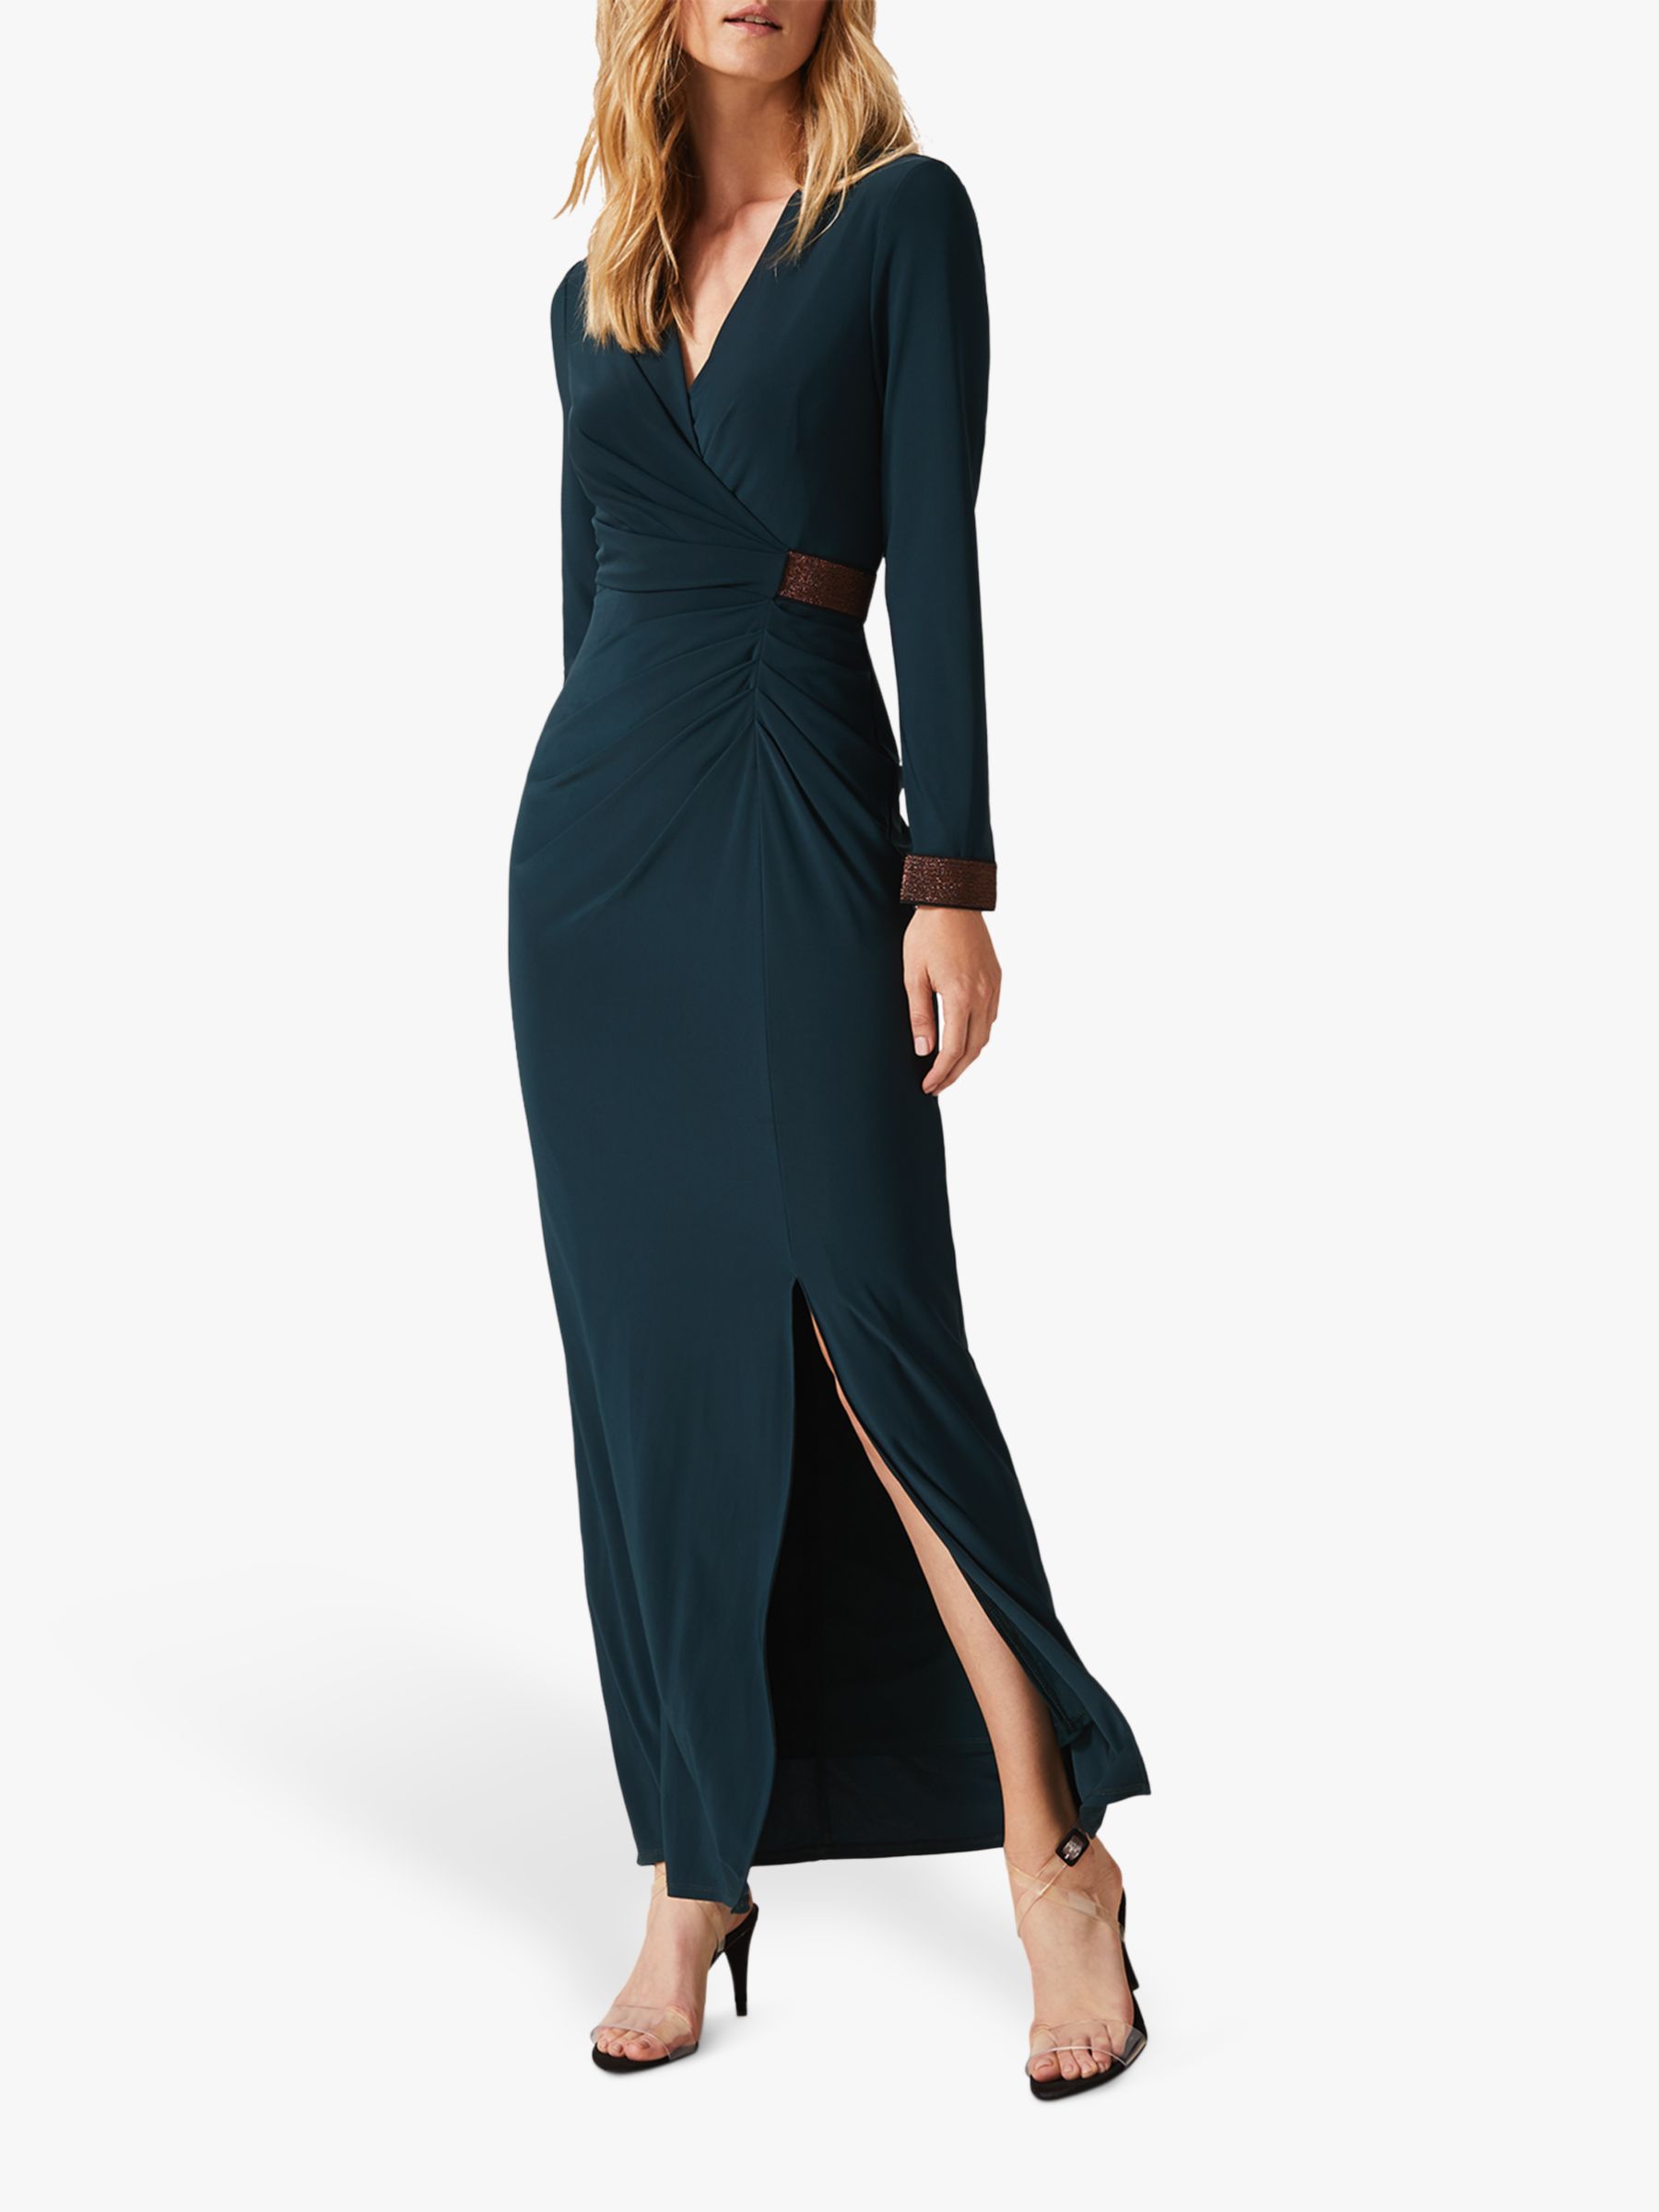 Phase Eight Maxi Dresses on Sale, 59% OFF | www.propellermadrid.com